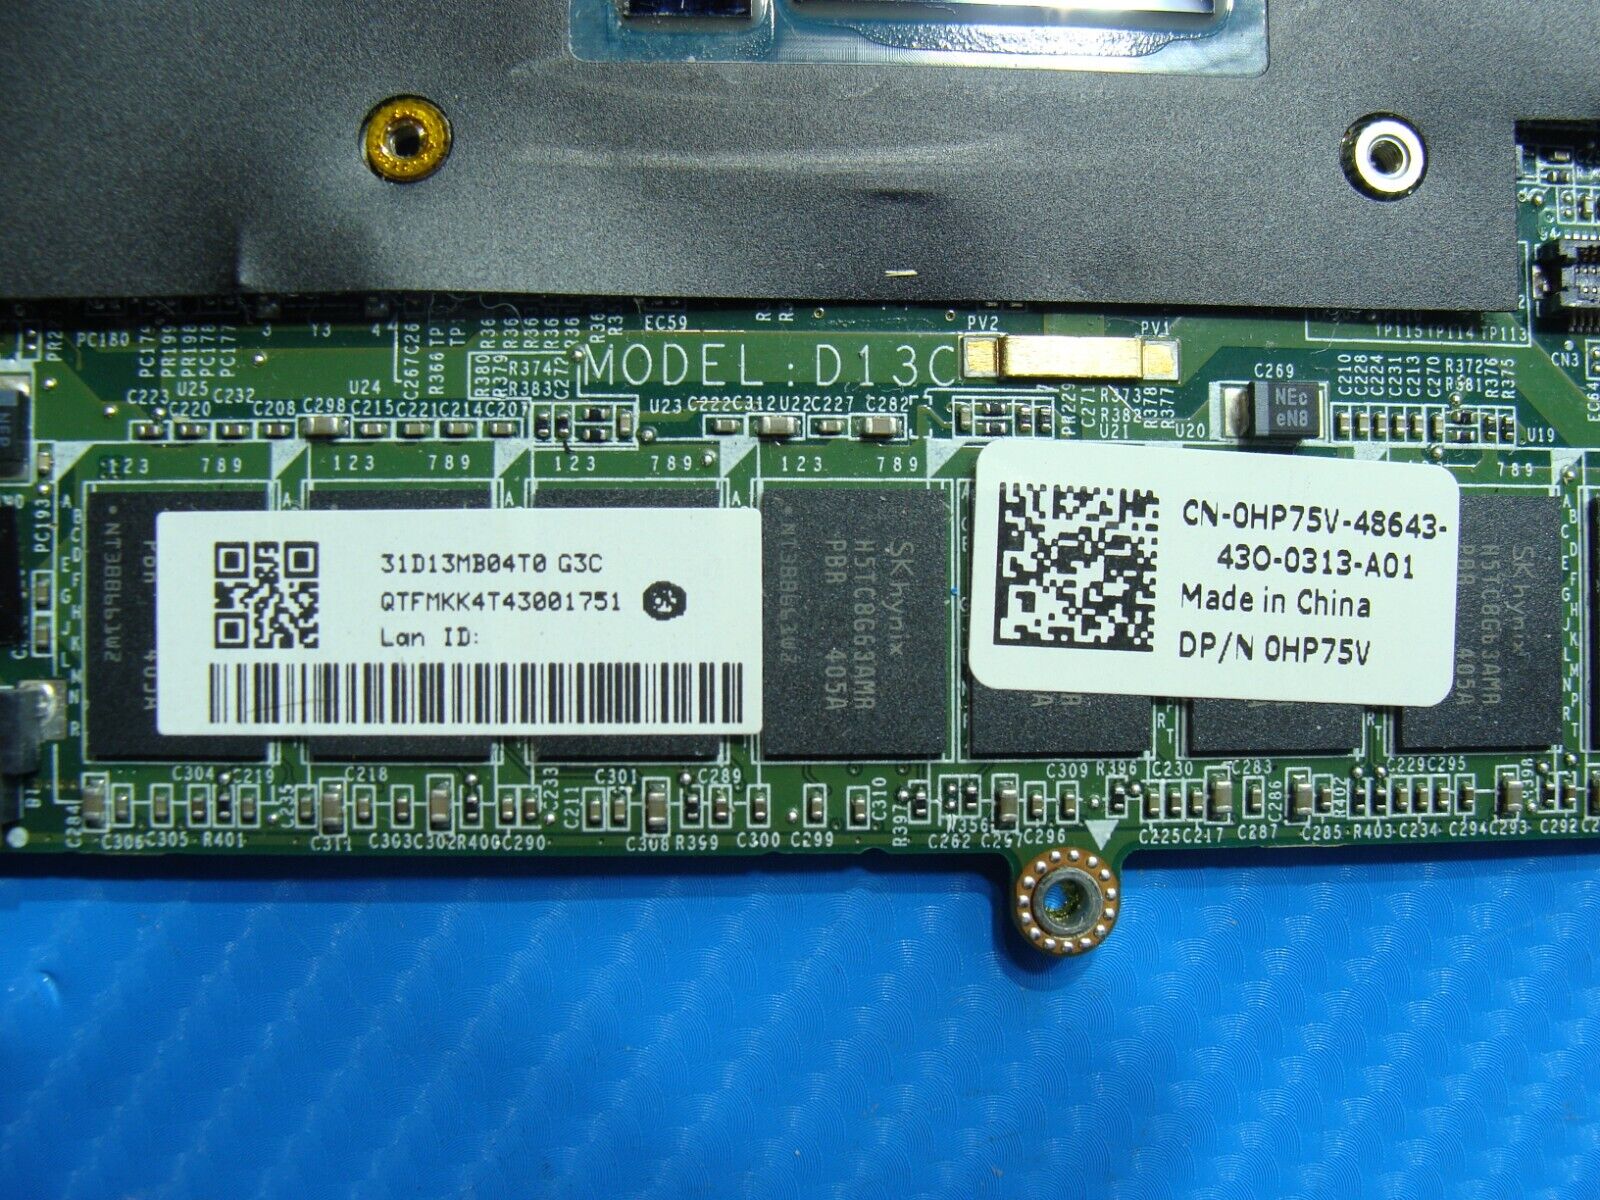 Dell XPS 13 9333 13.3